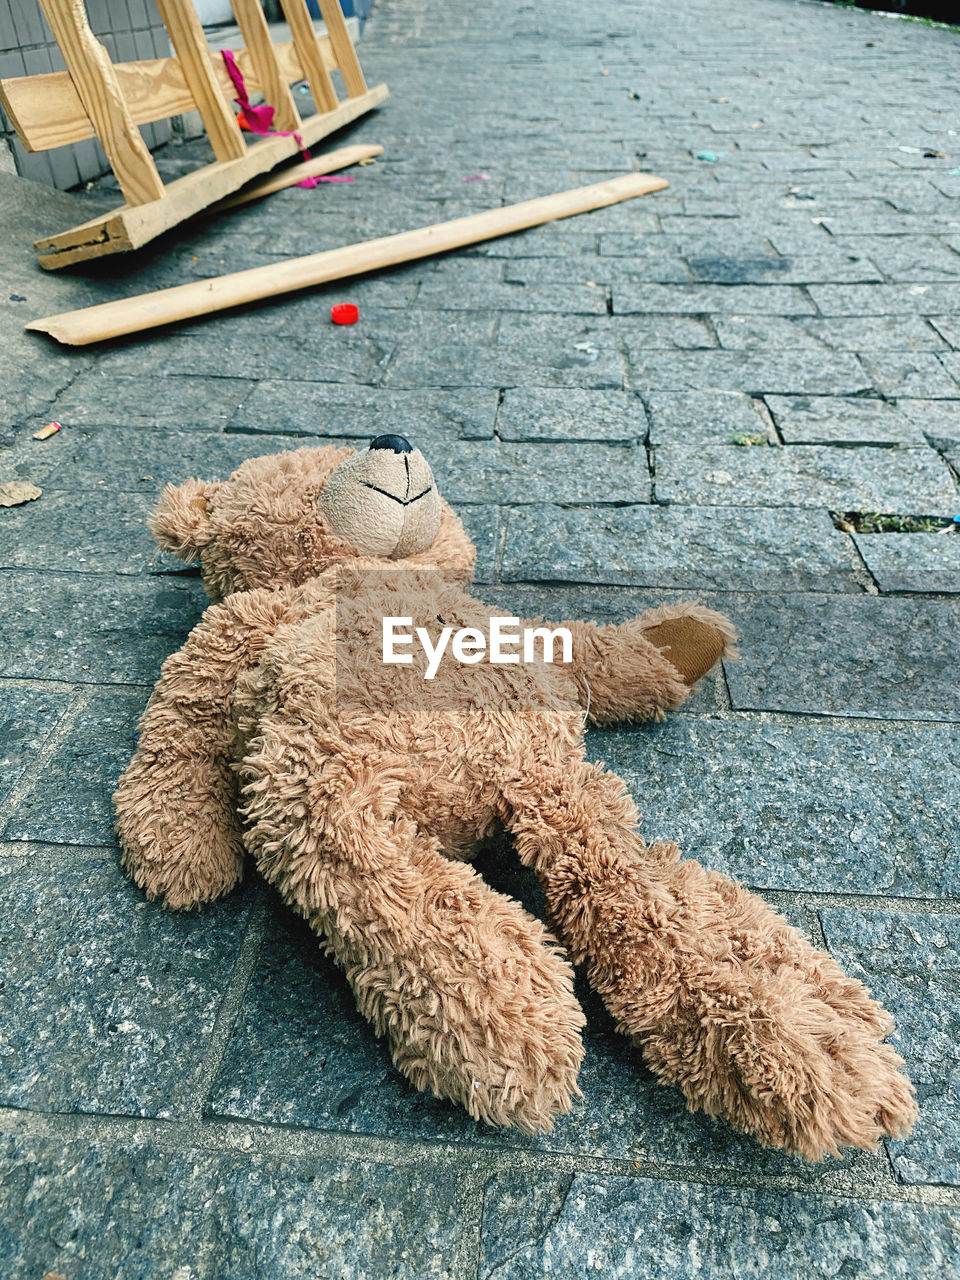 HIGH ANGLE VIEW OF STUFFED TOY ON COBBLESTONE STREET